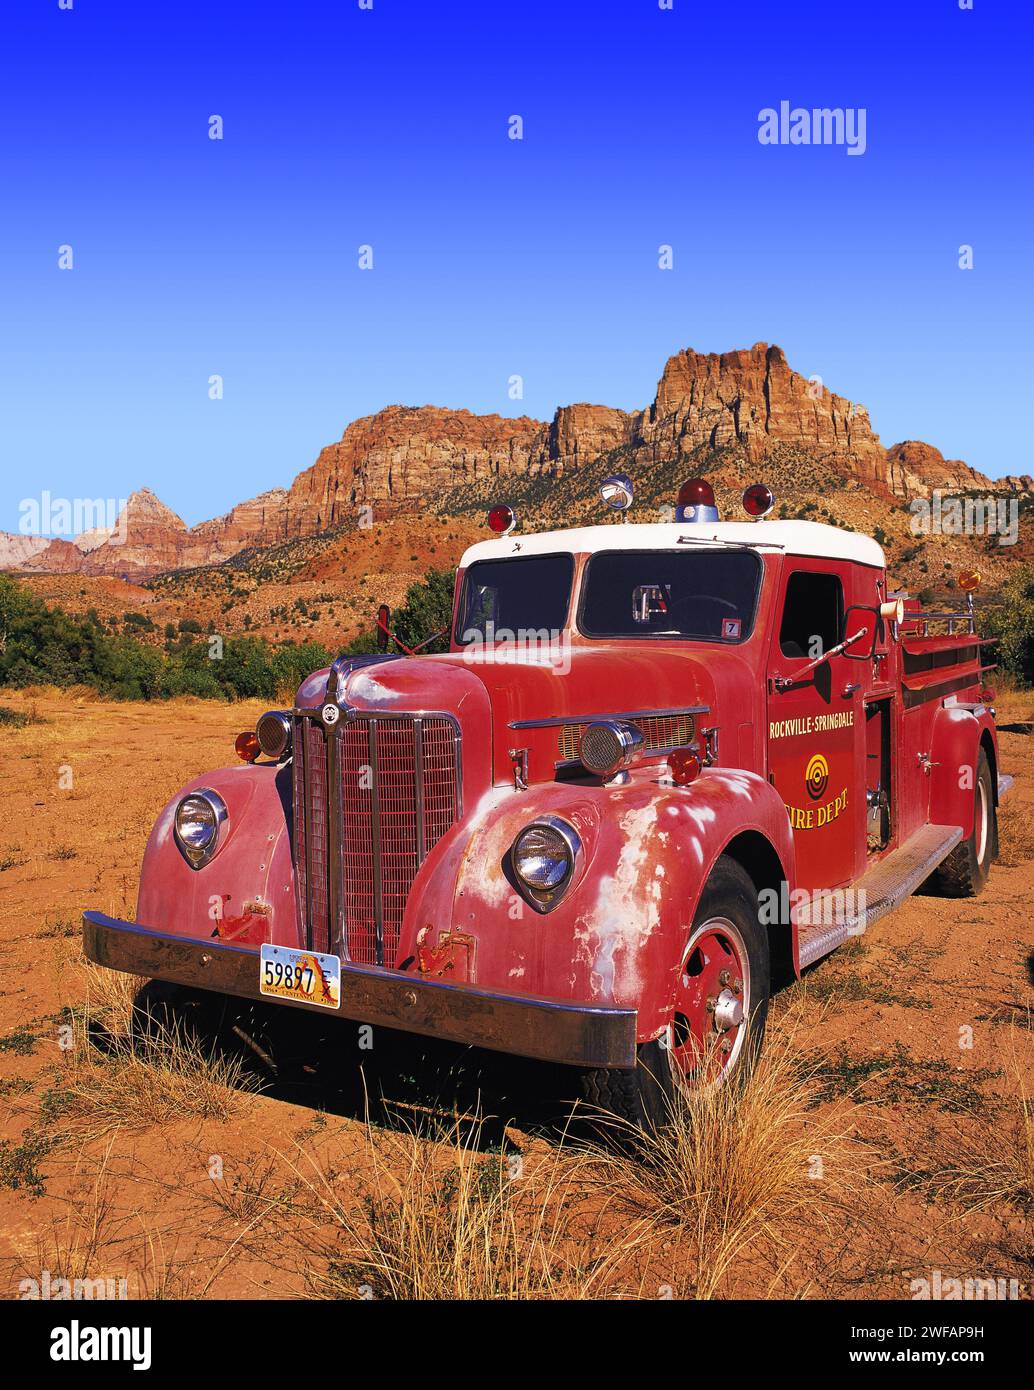 Old-style red fire engine parked on scrubland at the entrance to Zion Canyon, Utah, USA Oldtimer, Altes Feuerwehrauto im Zion Canyon, Utah, USA Stock Photo